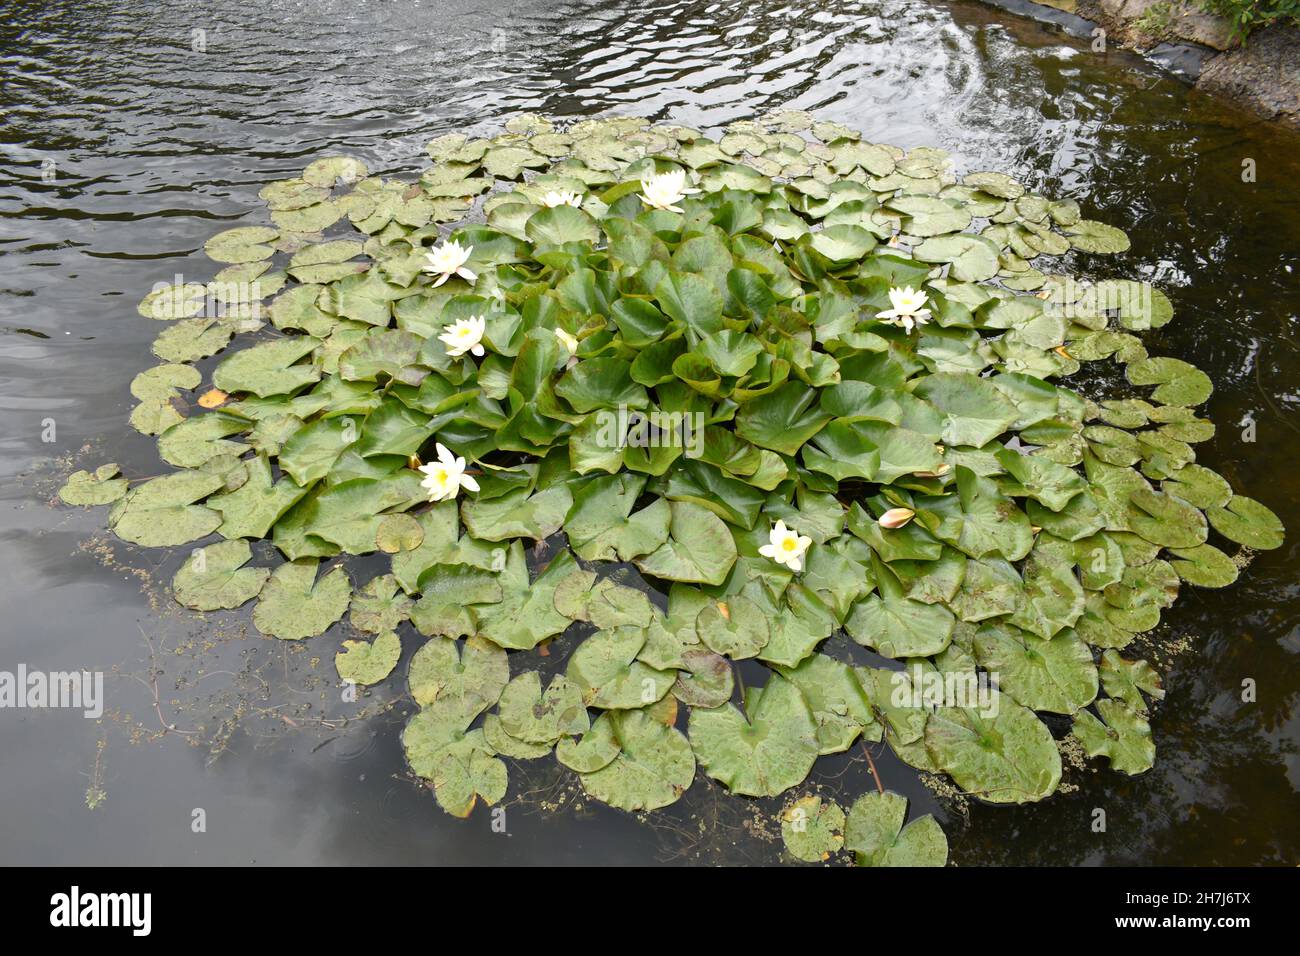 close up of lily pads and white lily flowers floating in a circular shape.  Lotus flowers and leaves on a river outside on a summers day Stock Photo